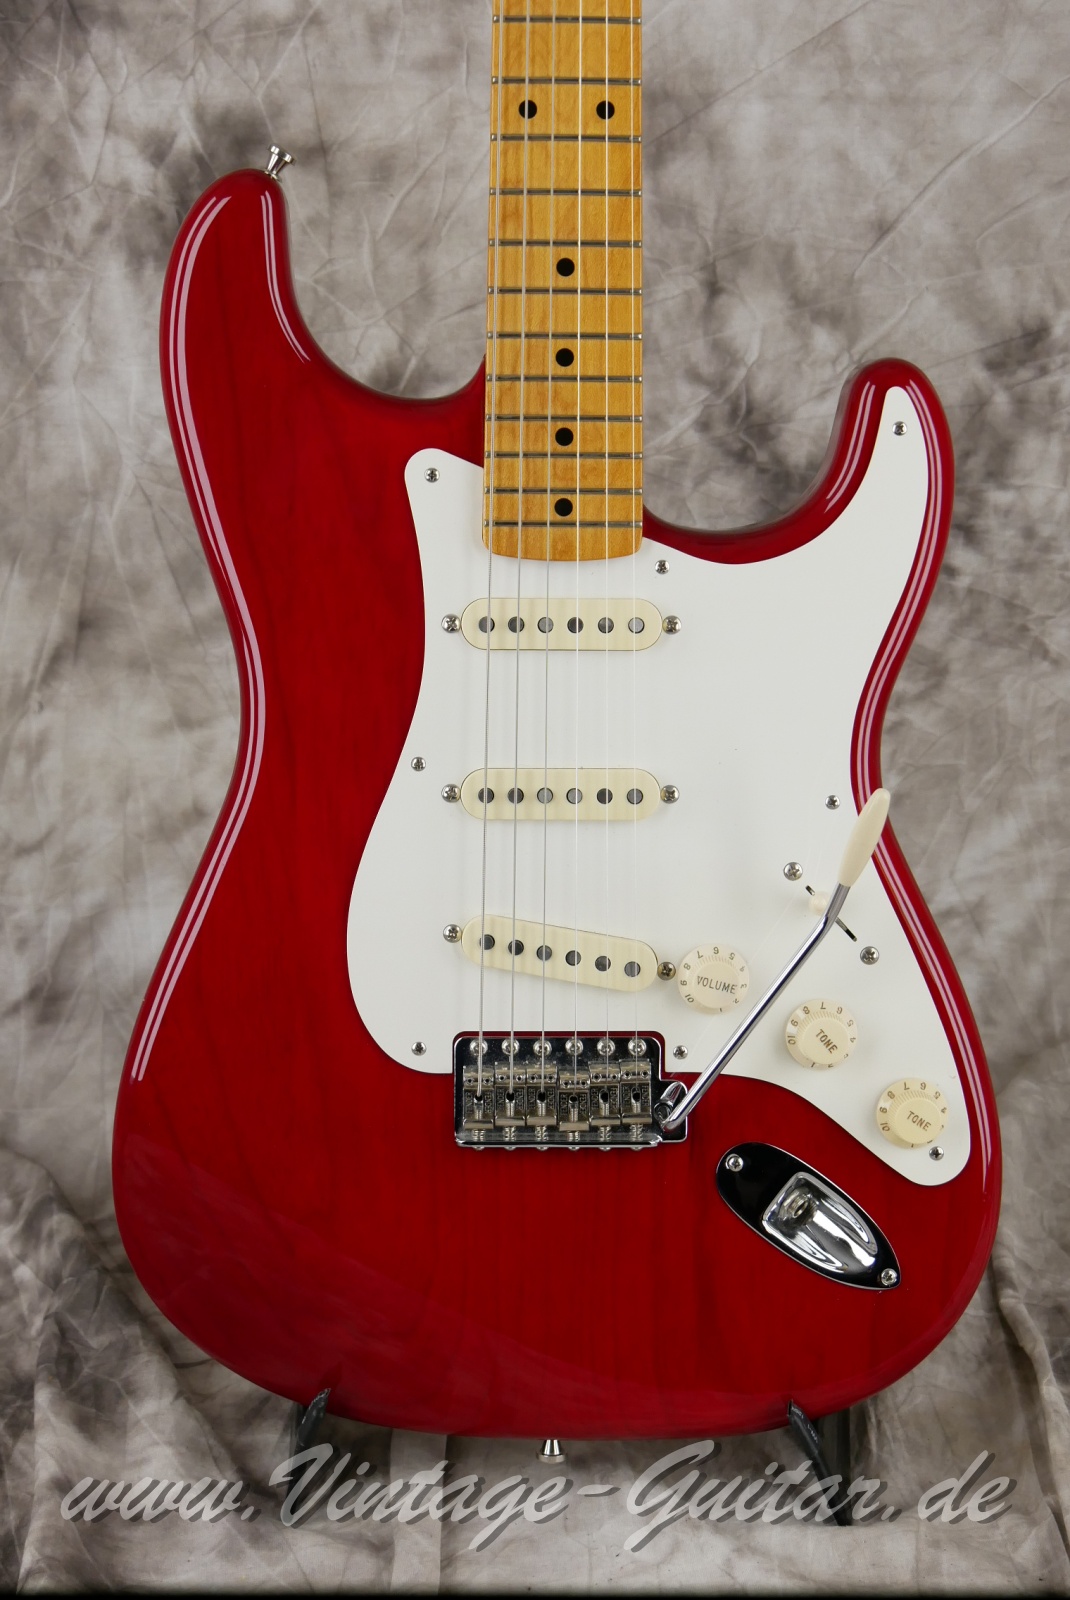 Fender_Stratocaster_classic_50s_Mexico_transparent_red_2010-005.JPG